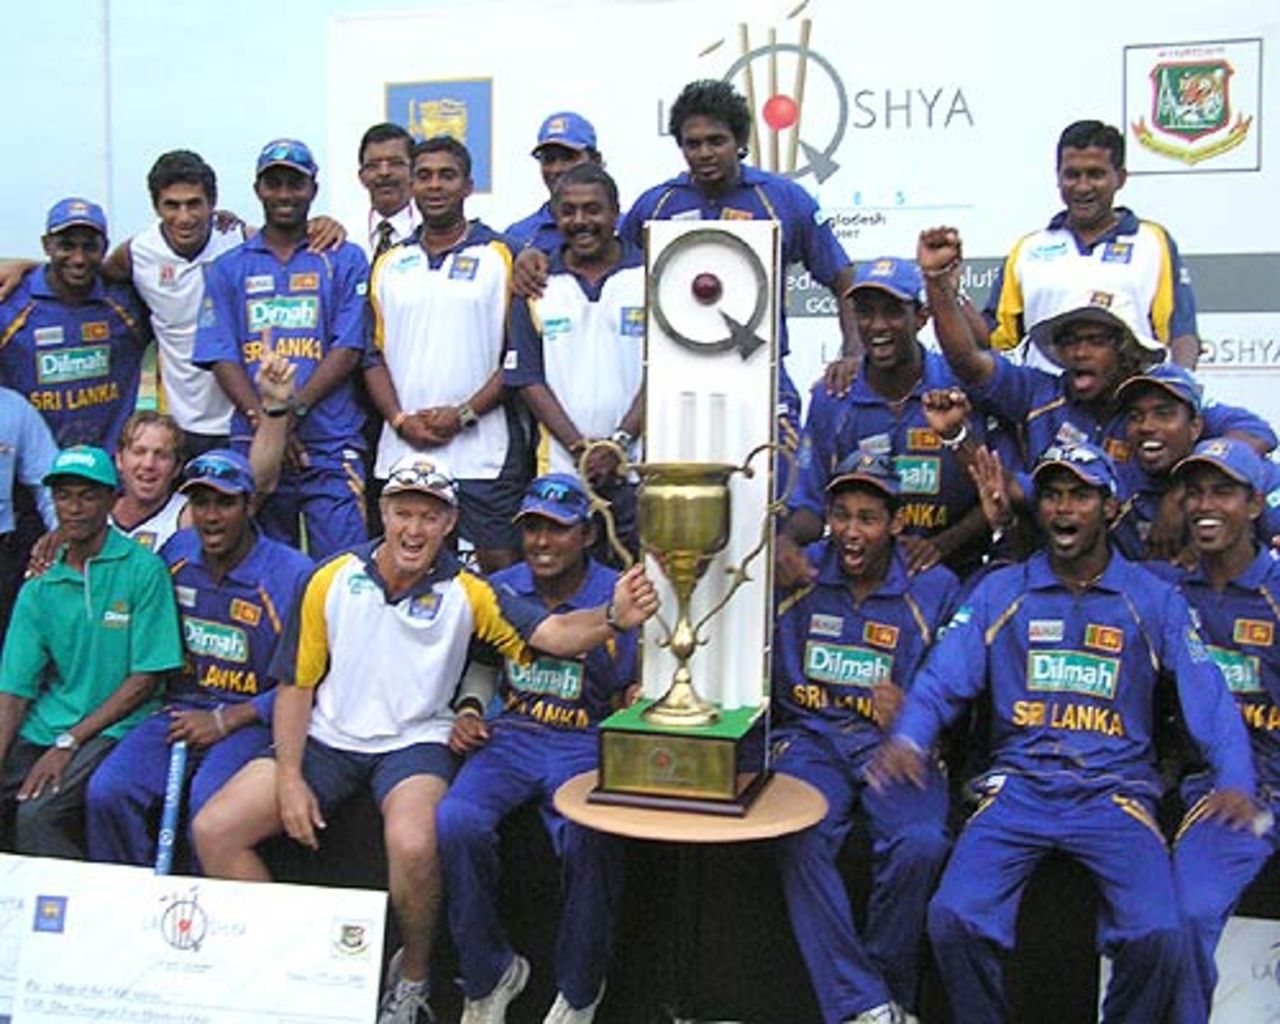 Sri Lankan players with the trophy after beating Bangladesh by 39 runs in the third ODI, Colombo, 3rd ODI, July 25, 2007